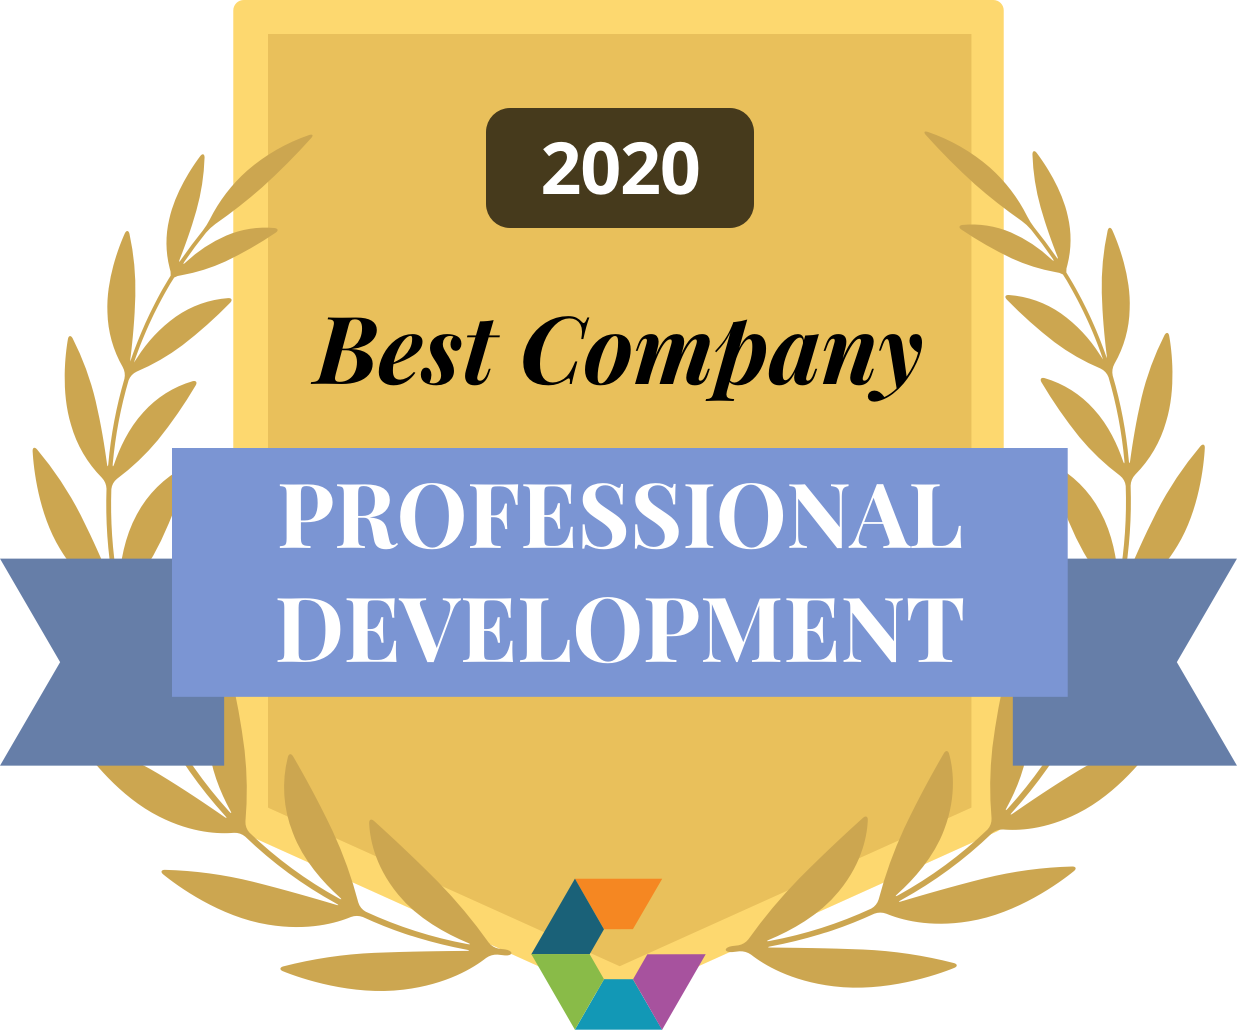 Comparably- Best Professional Development